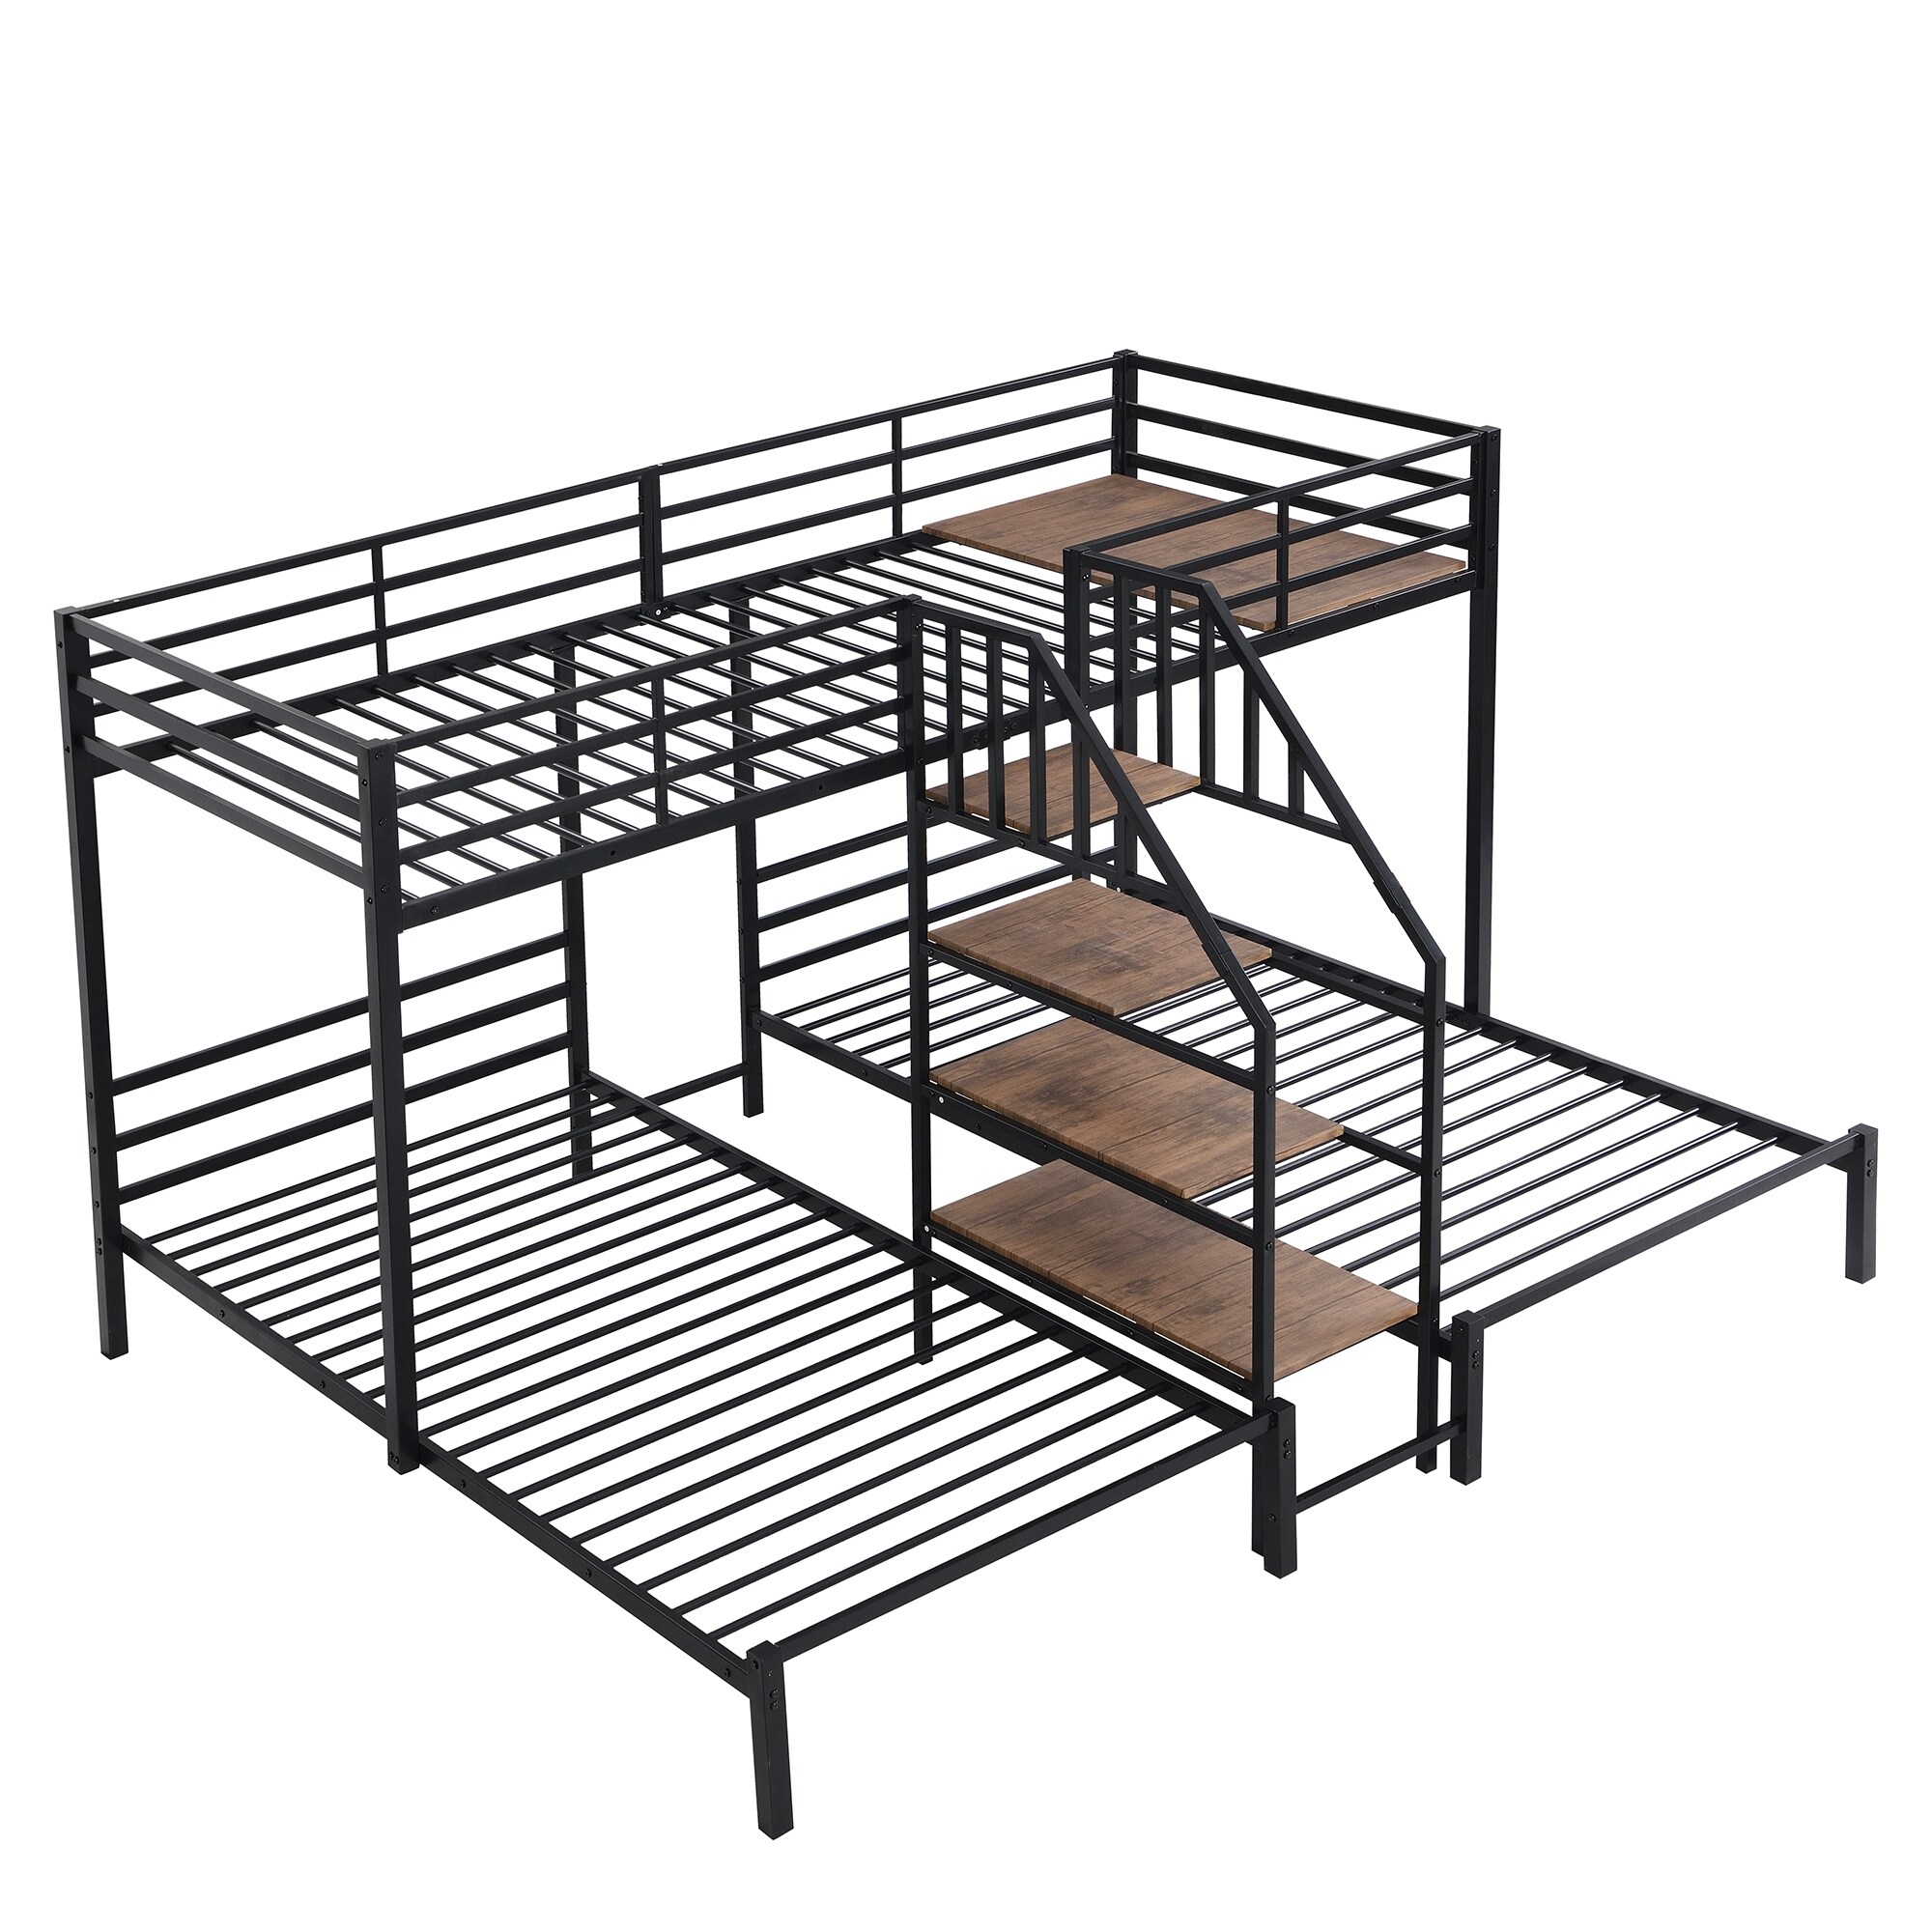 Triple Bunk Bed with Storage Shelves Staircase, Heavy-Duty Metal Frame, 3 Beds in 1 Twin Over Twin&Twin, Space Saving Design